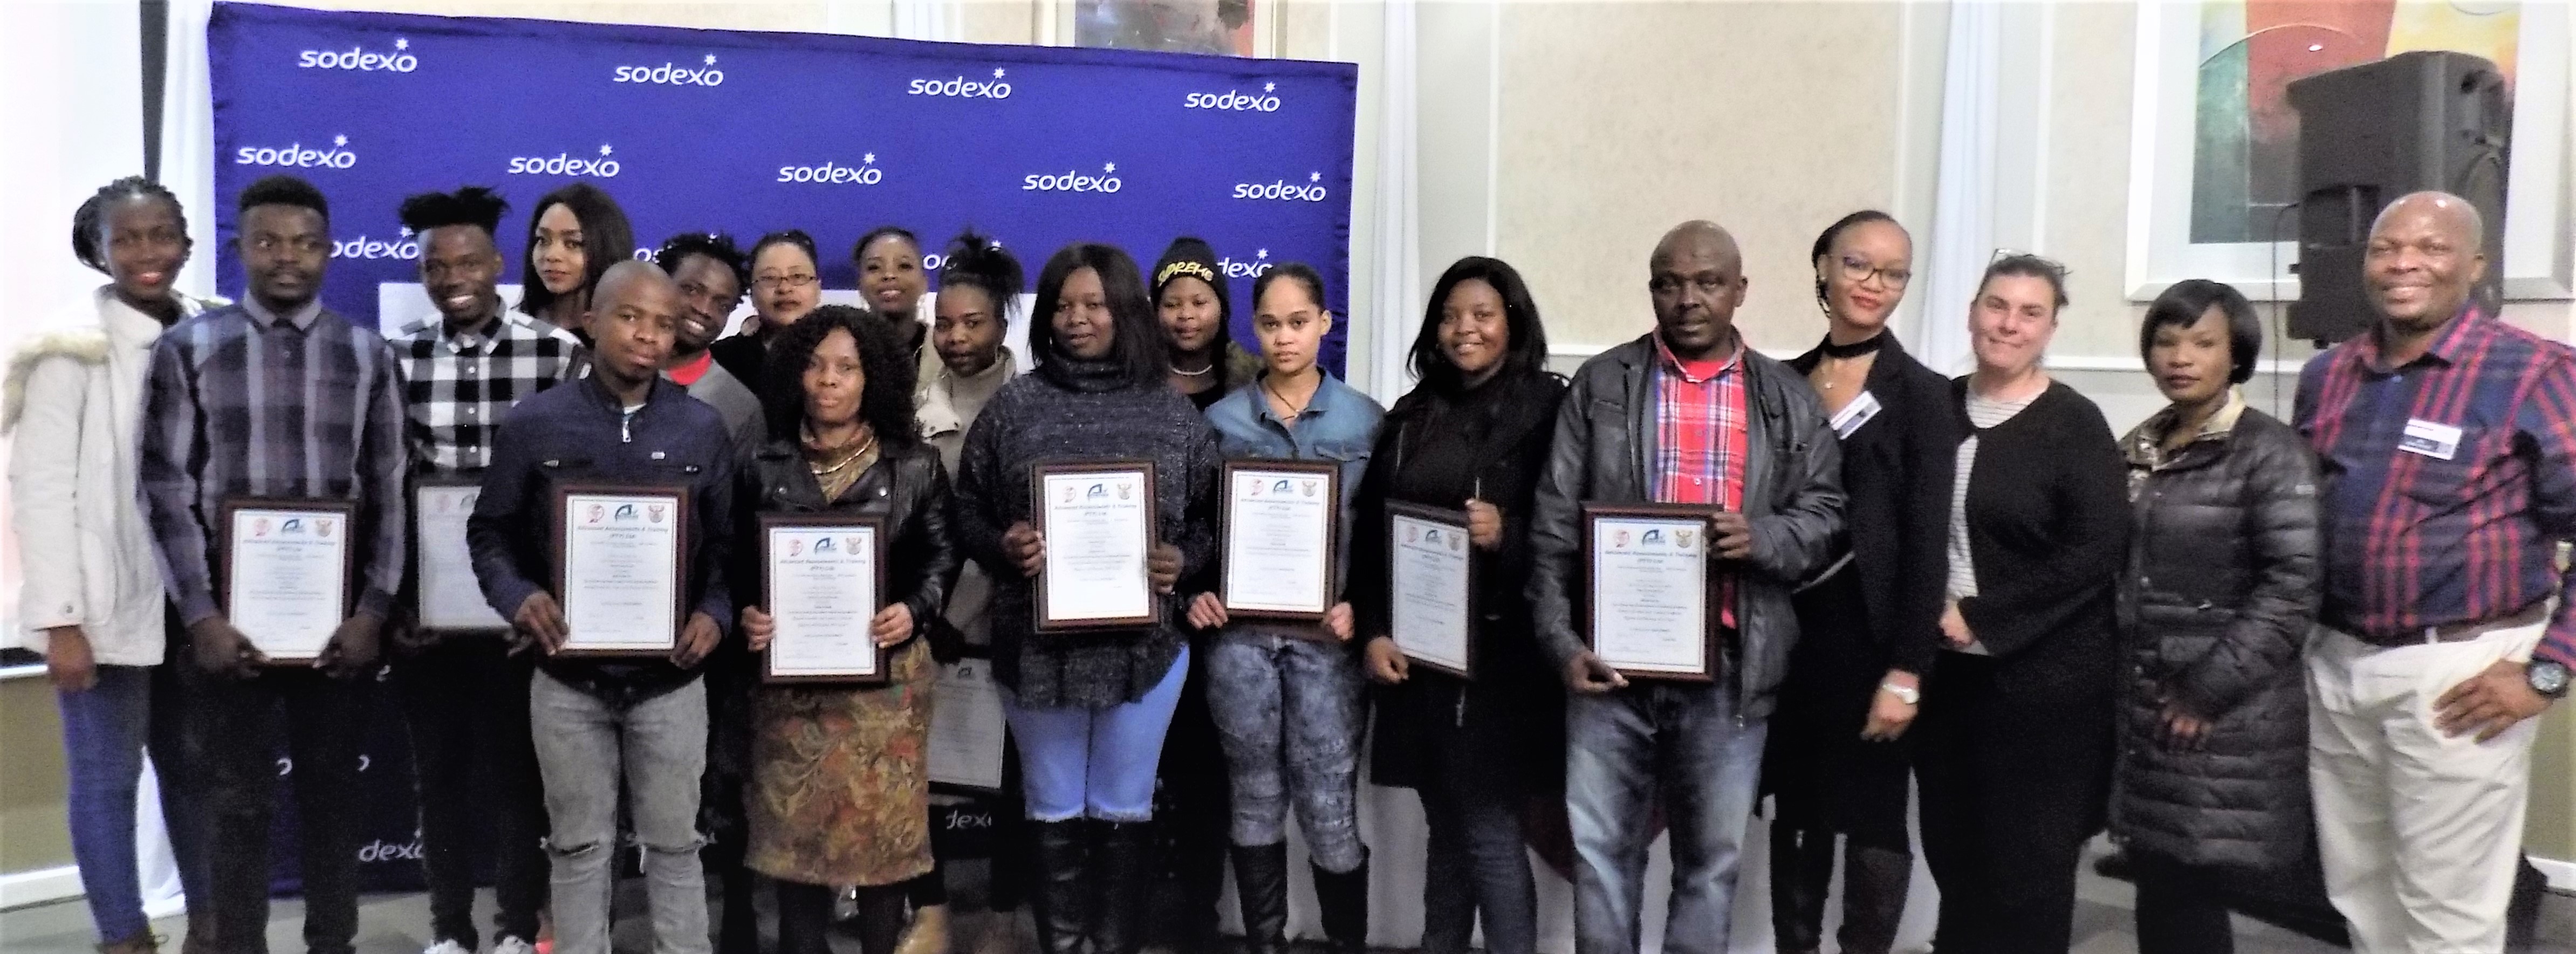 sodexo southern africa learners receiving their certificates